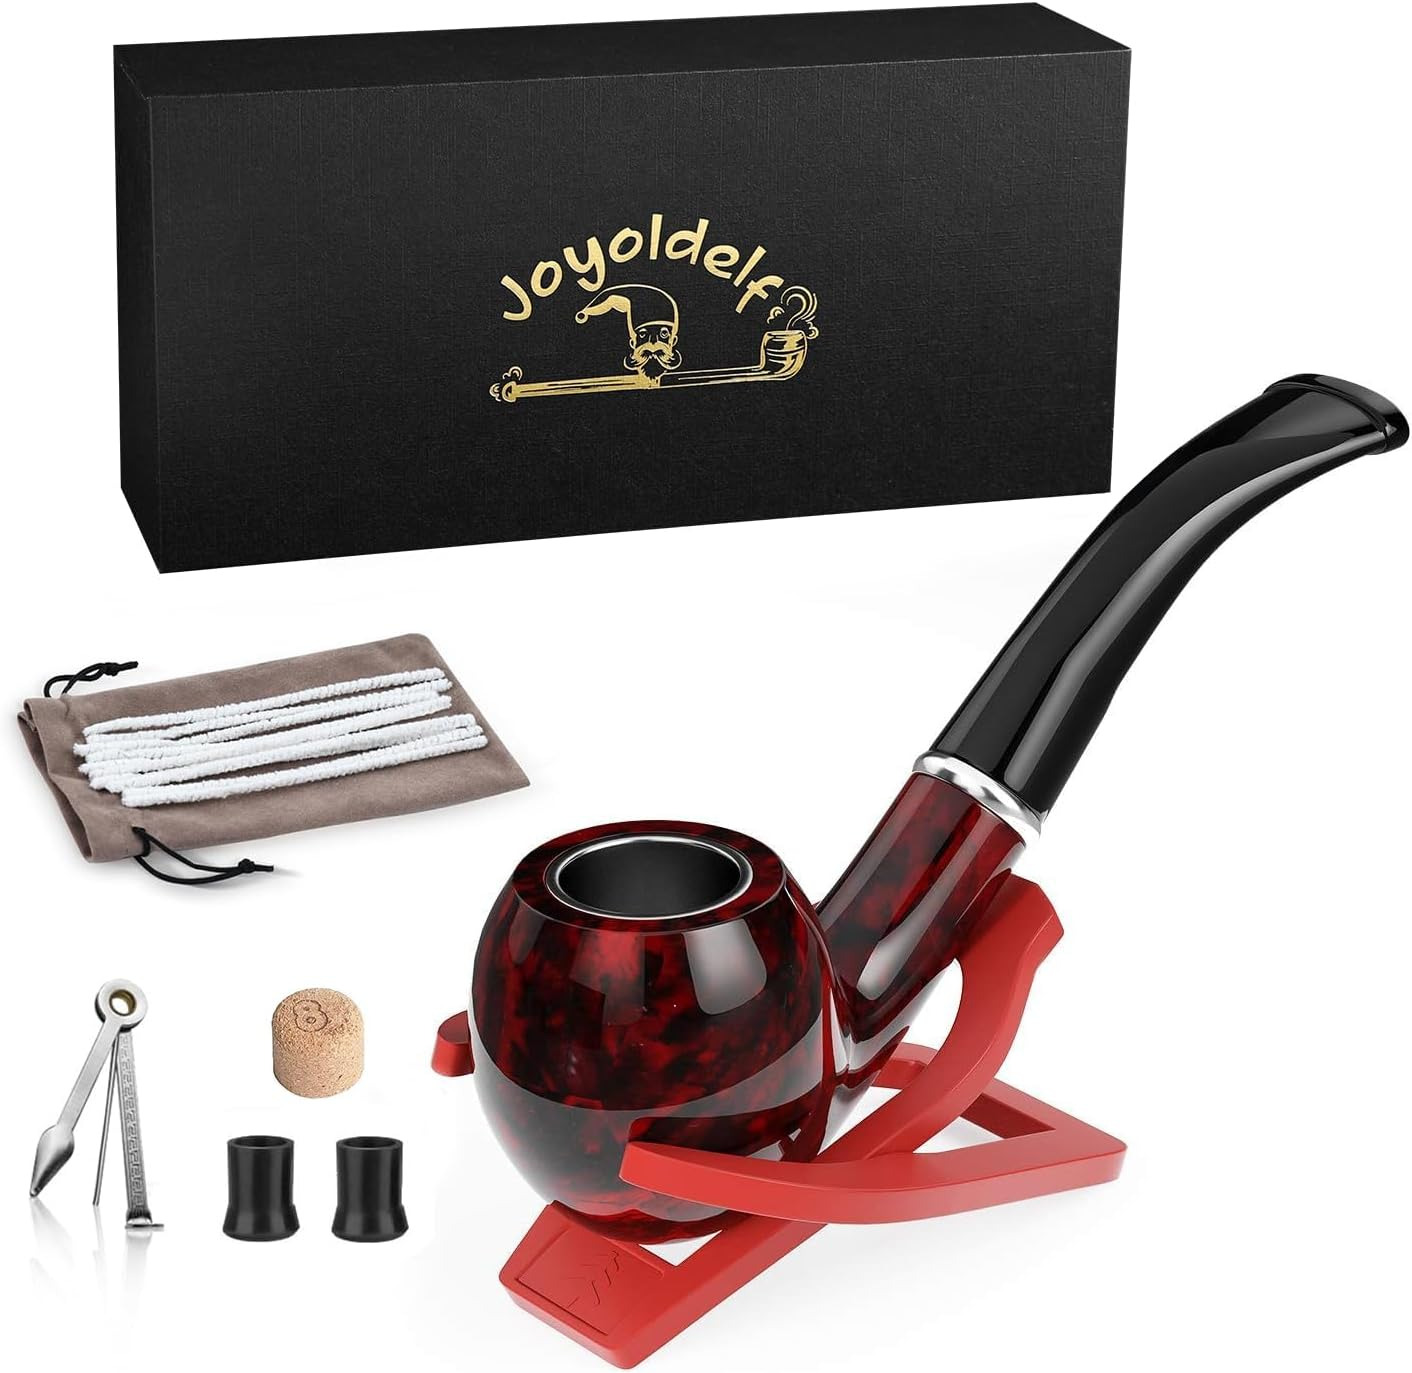 Joyoldelf Tobacco Pipe, Classic Smoking Pipe with Foldable Tobacco Pipe Stand, 